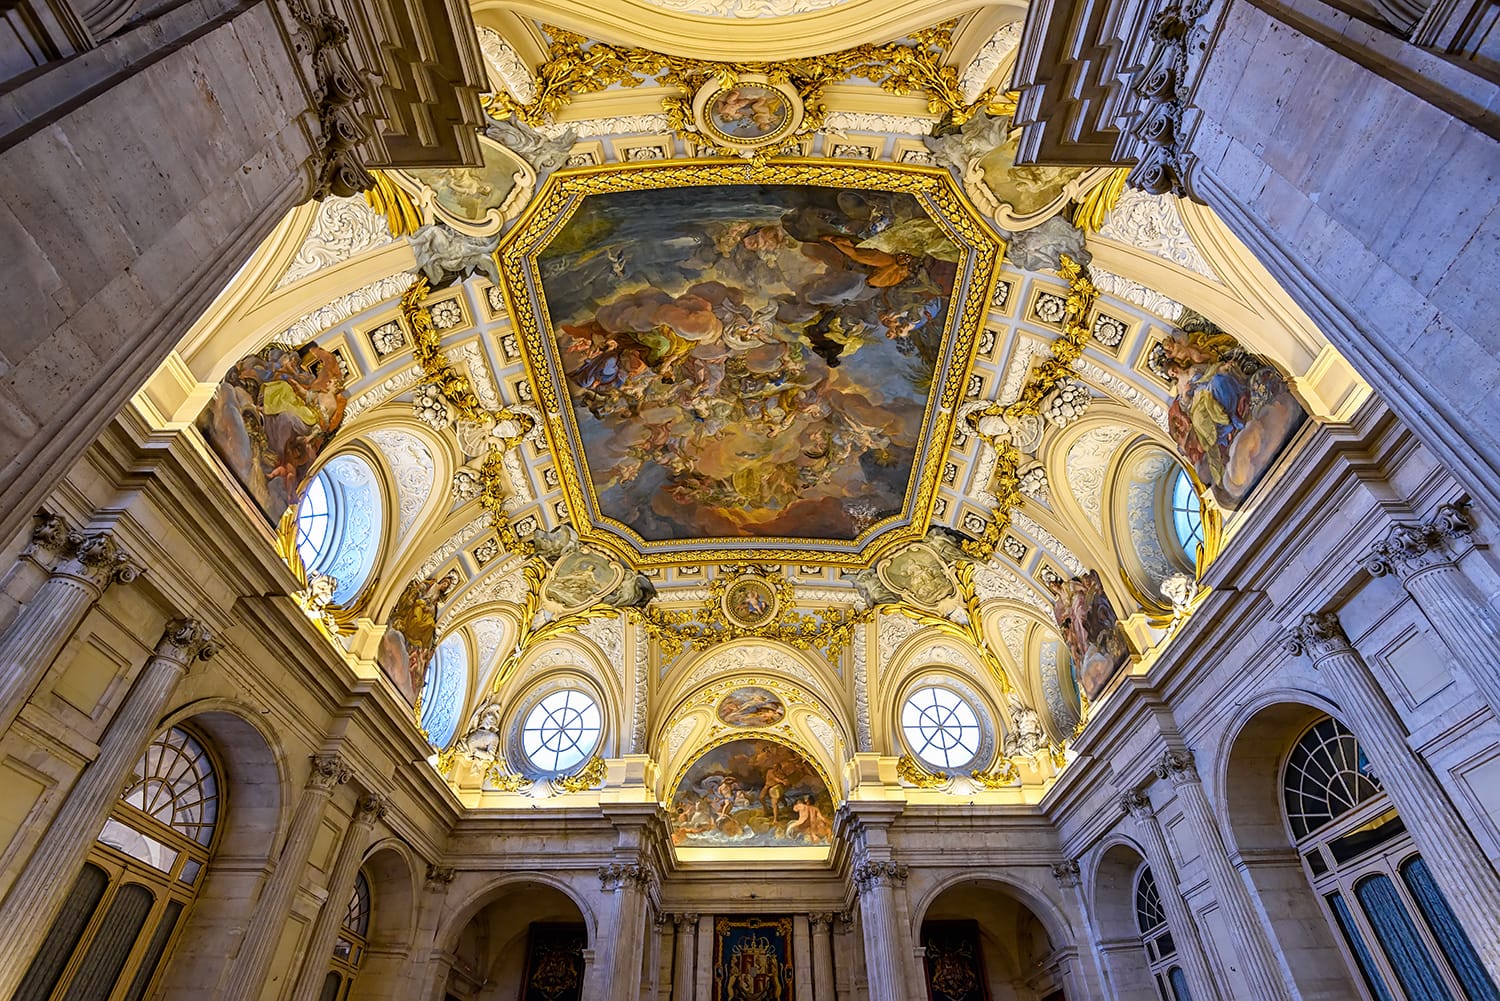 Moldings and the fresco Corrado Giaquinto (Spain Pays Homage to Religion and to the Church) in the Royal Palace of Madrid